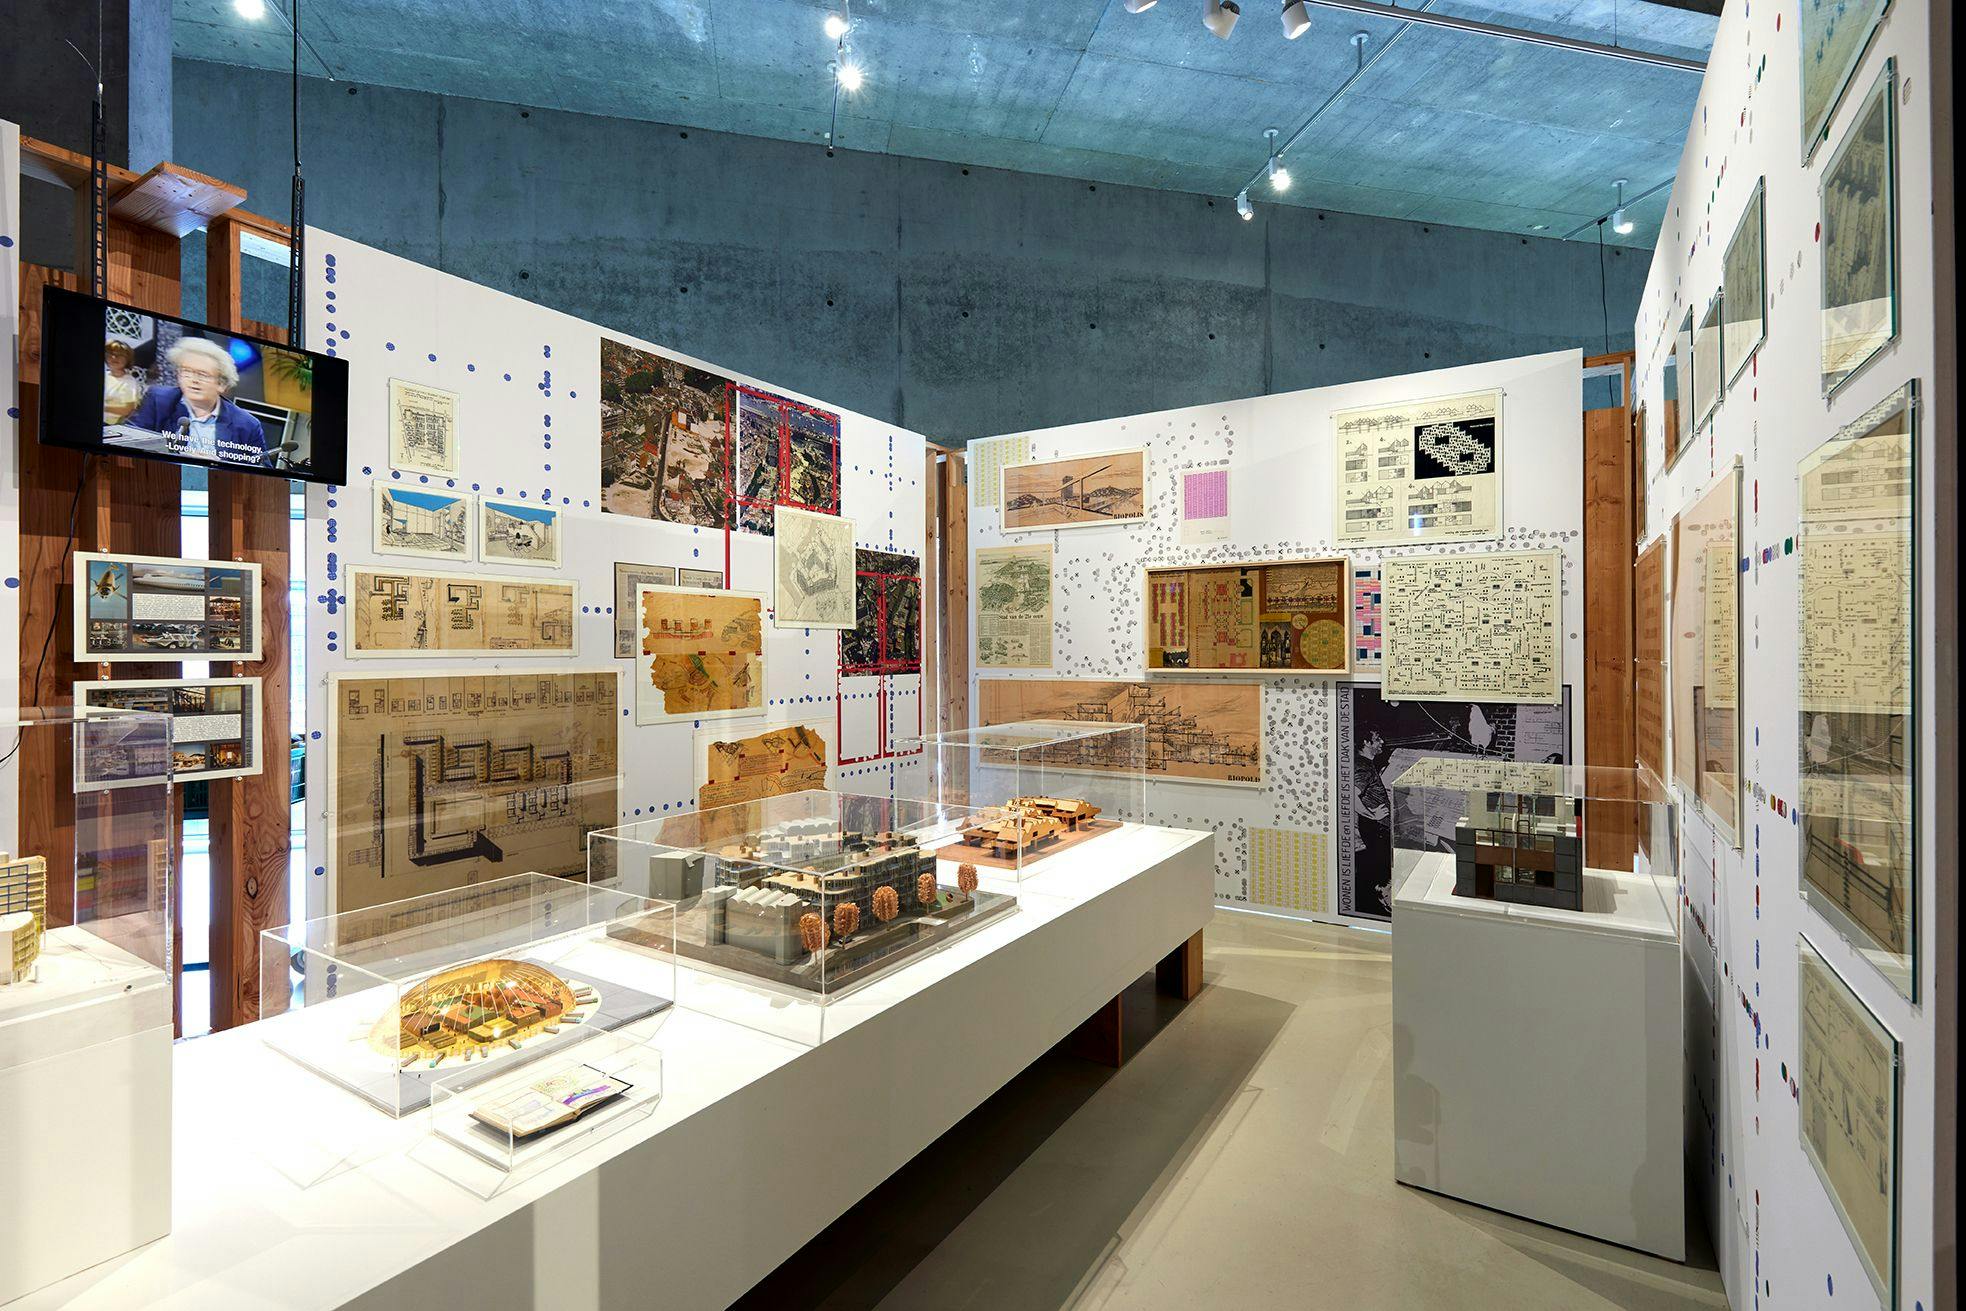 Installation view of the exhibition, with models in the foreground, and drawings on the wall.